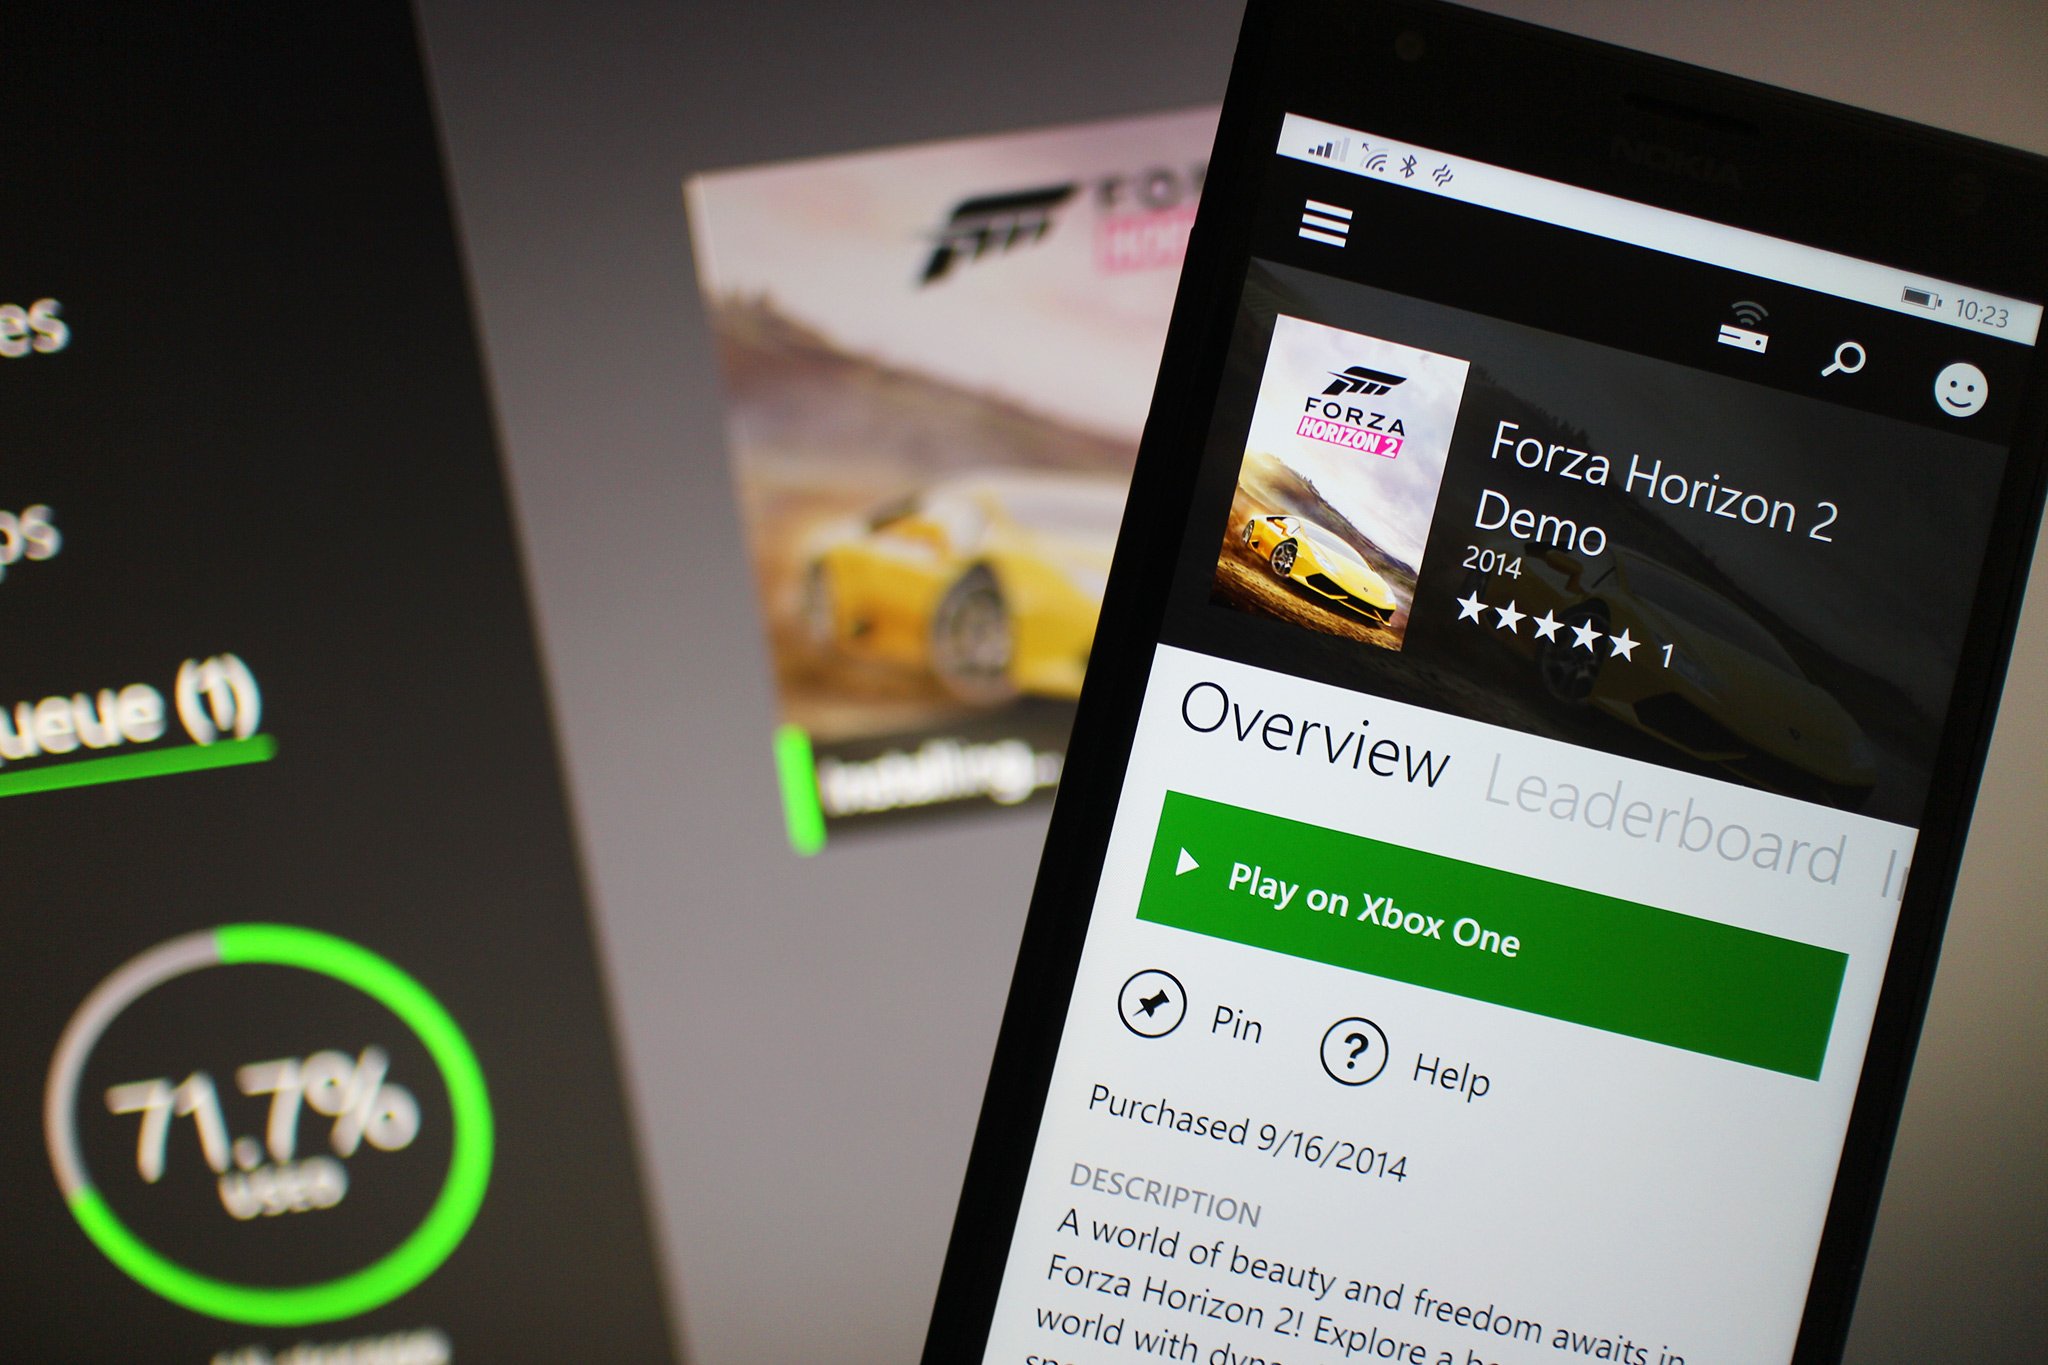 How To Use Windows Phone To Download Games And Apps To Your Xbox